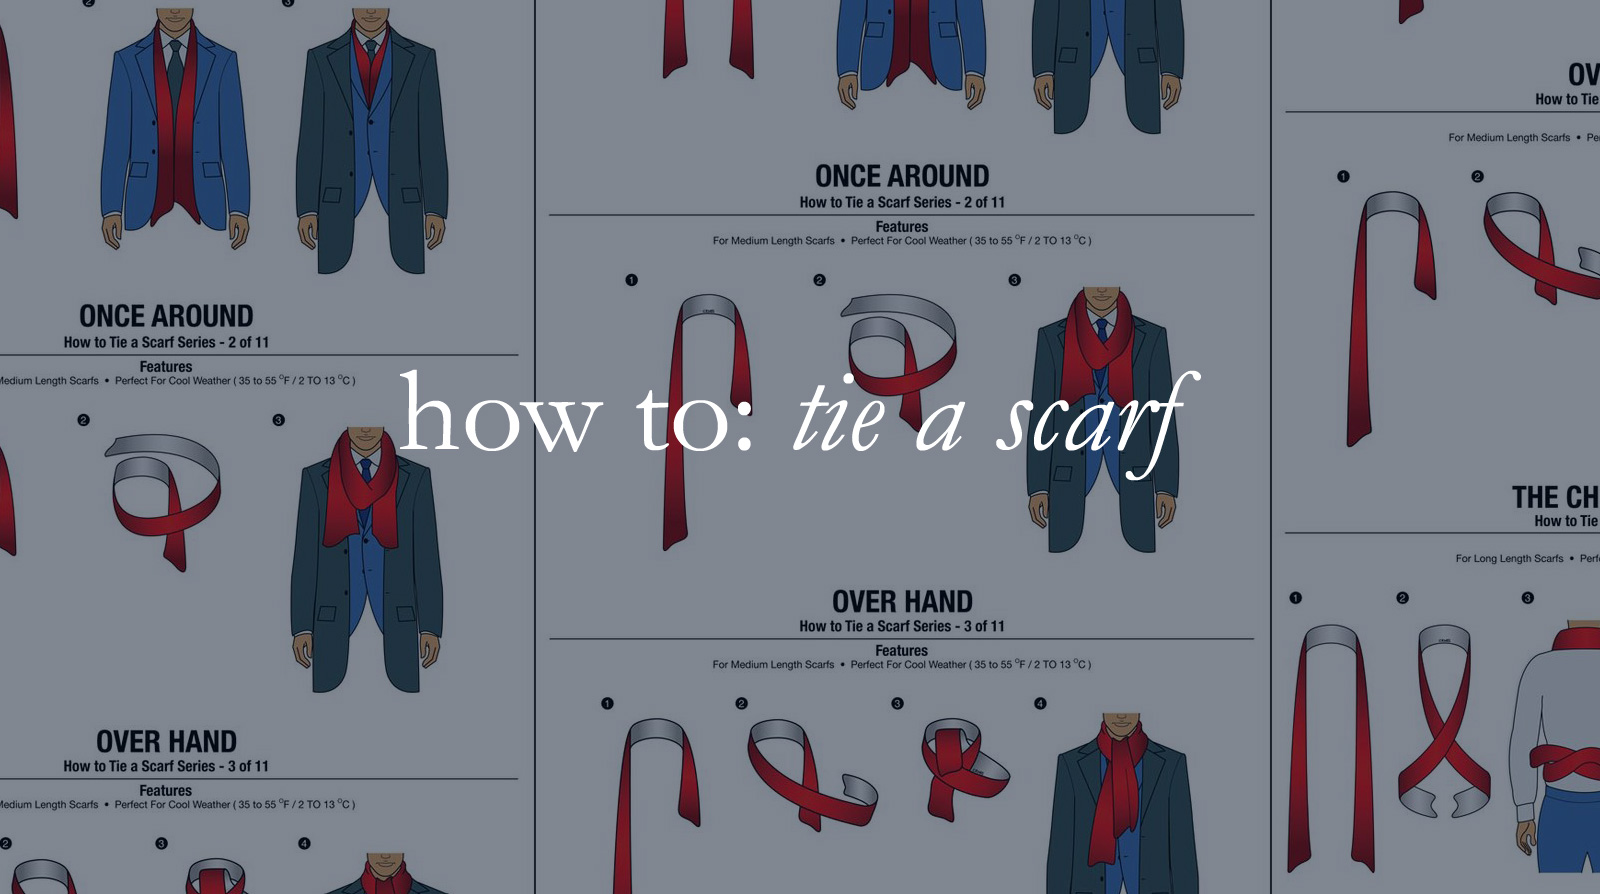 How to: tie a scarf